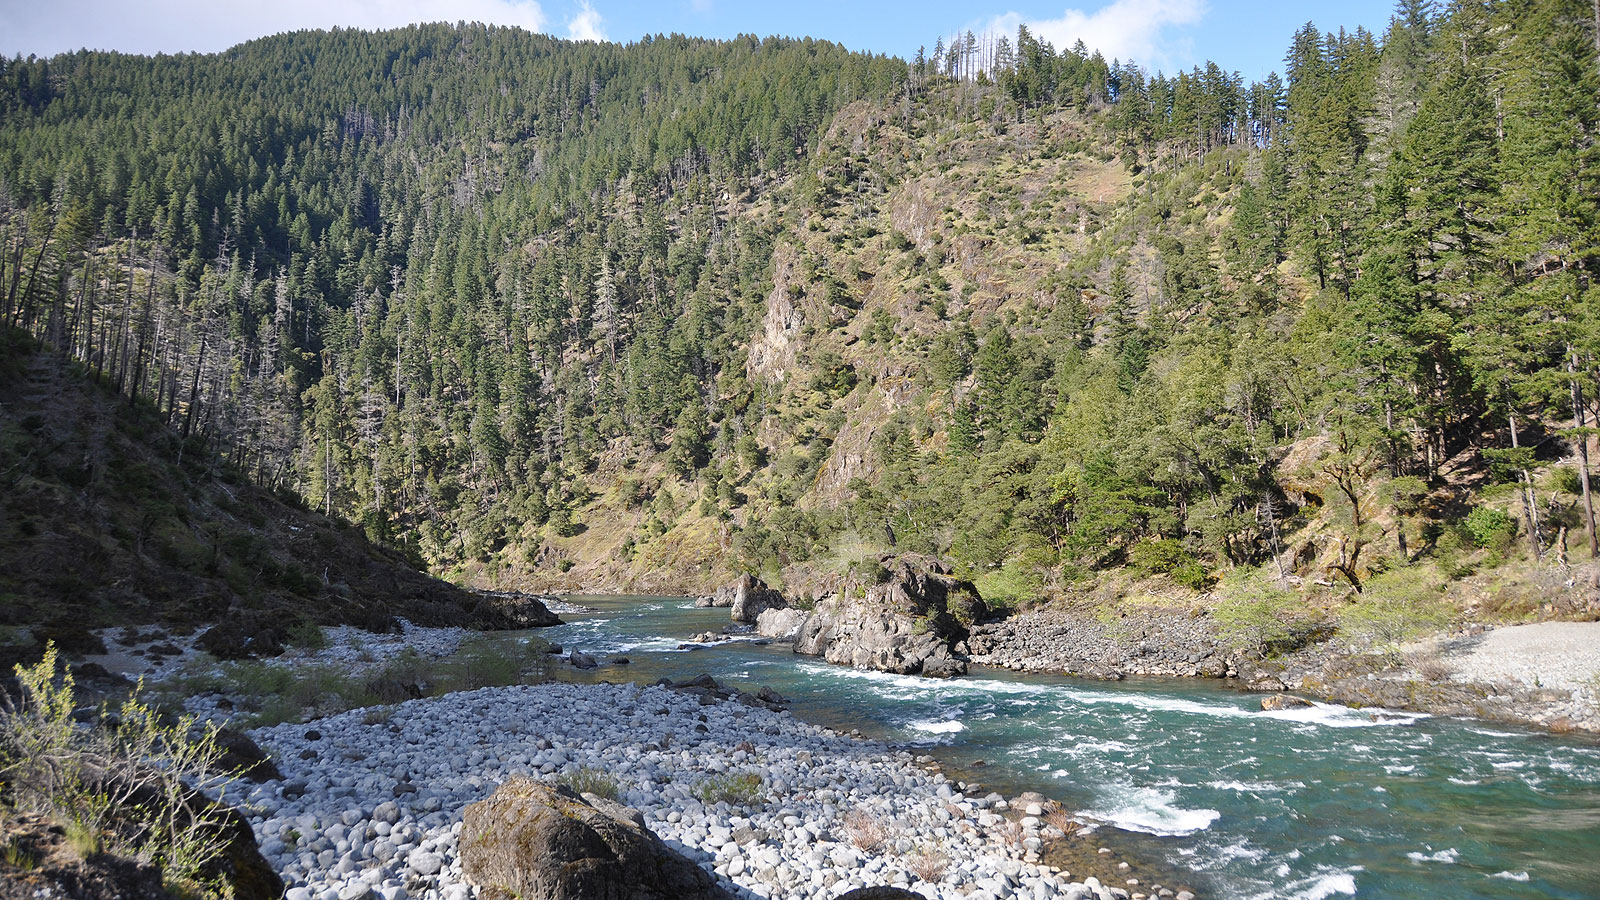 Looking downstream along the Illinois River in Southern Oregon